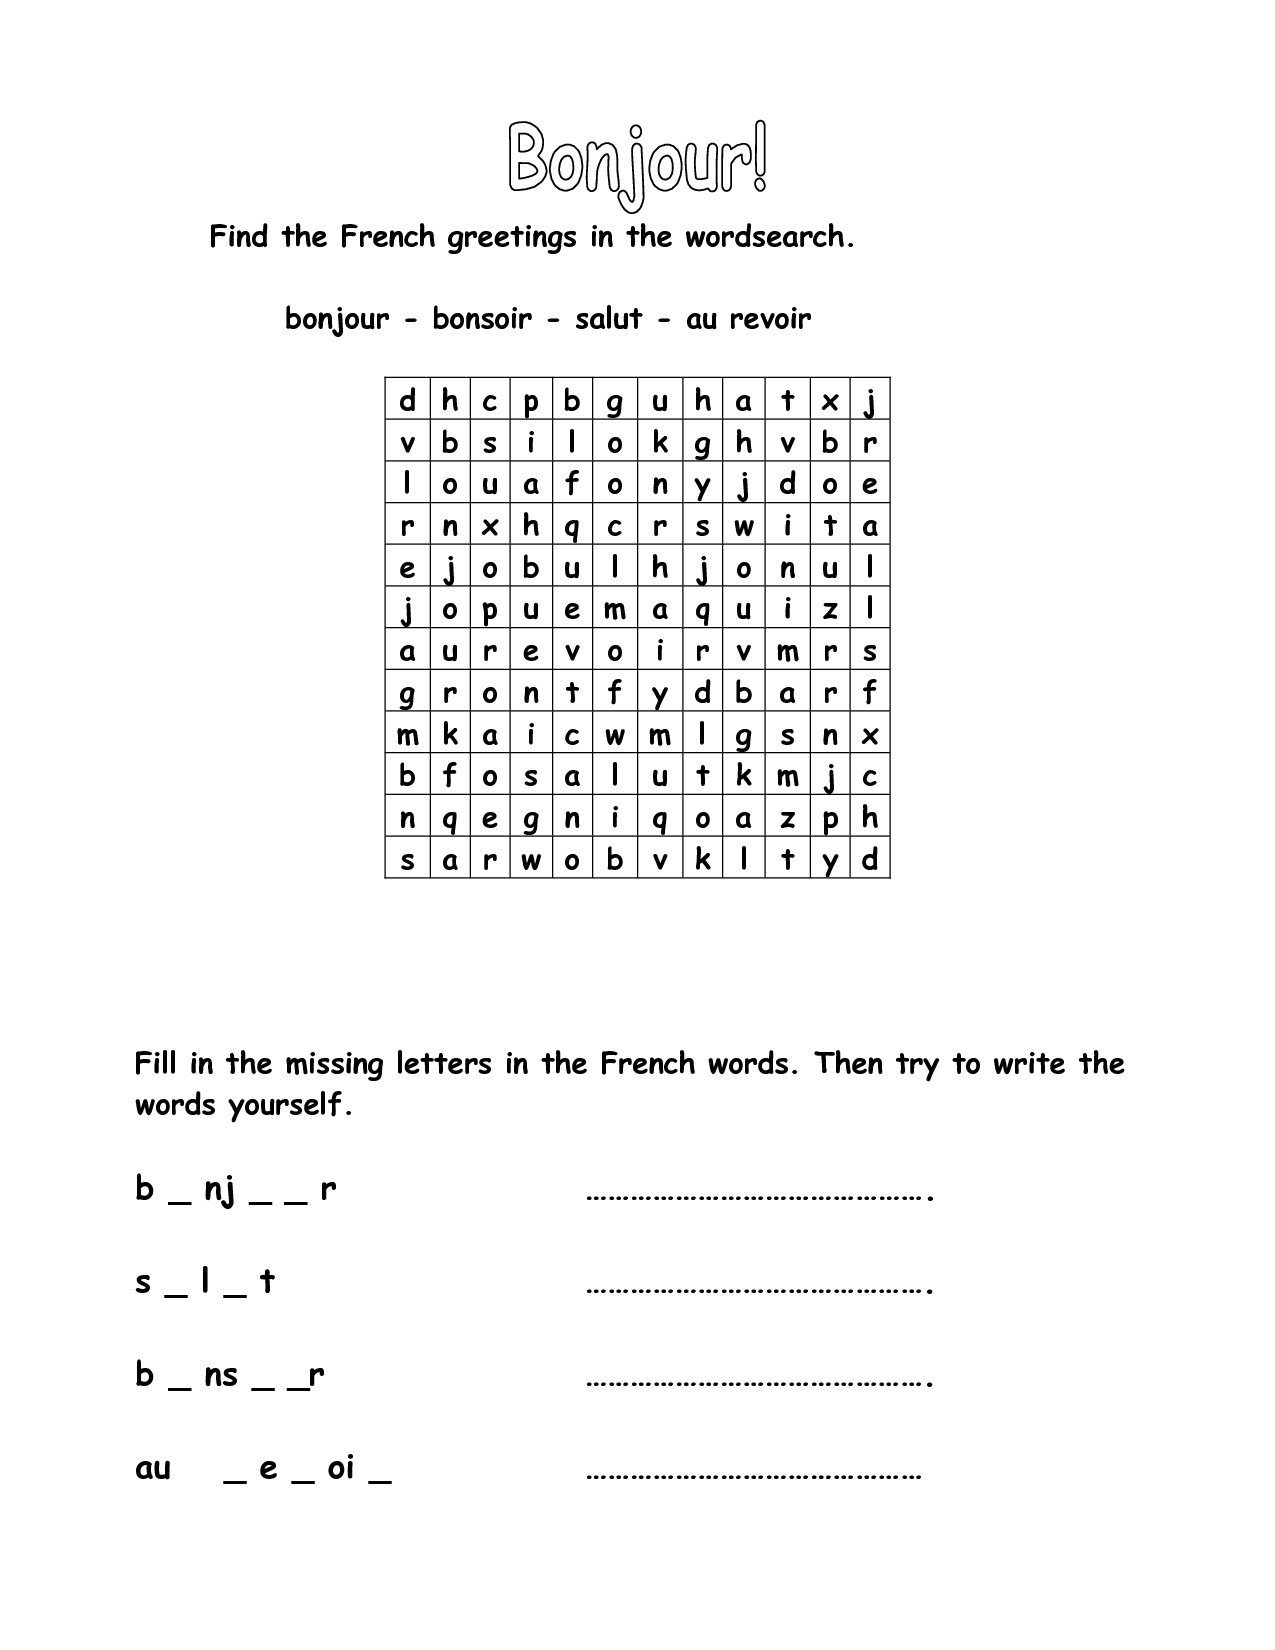 10-best-images-of-beginning-french-worksheets-free-printable-french-worksheets-french